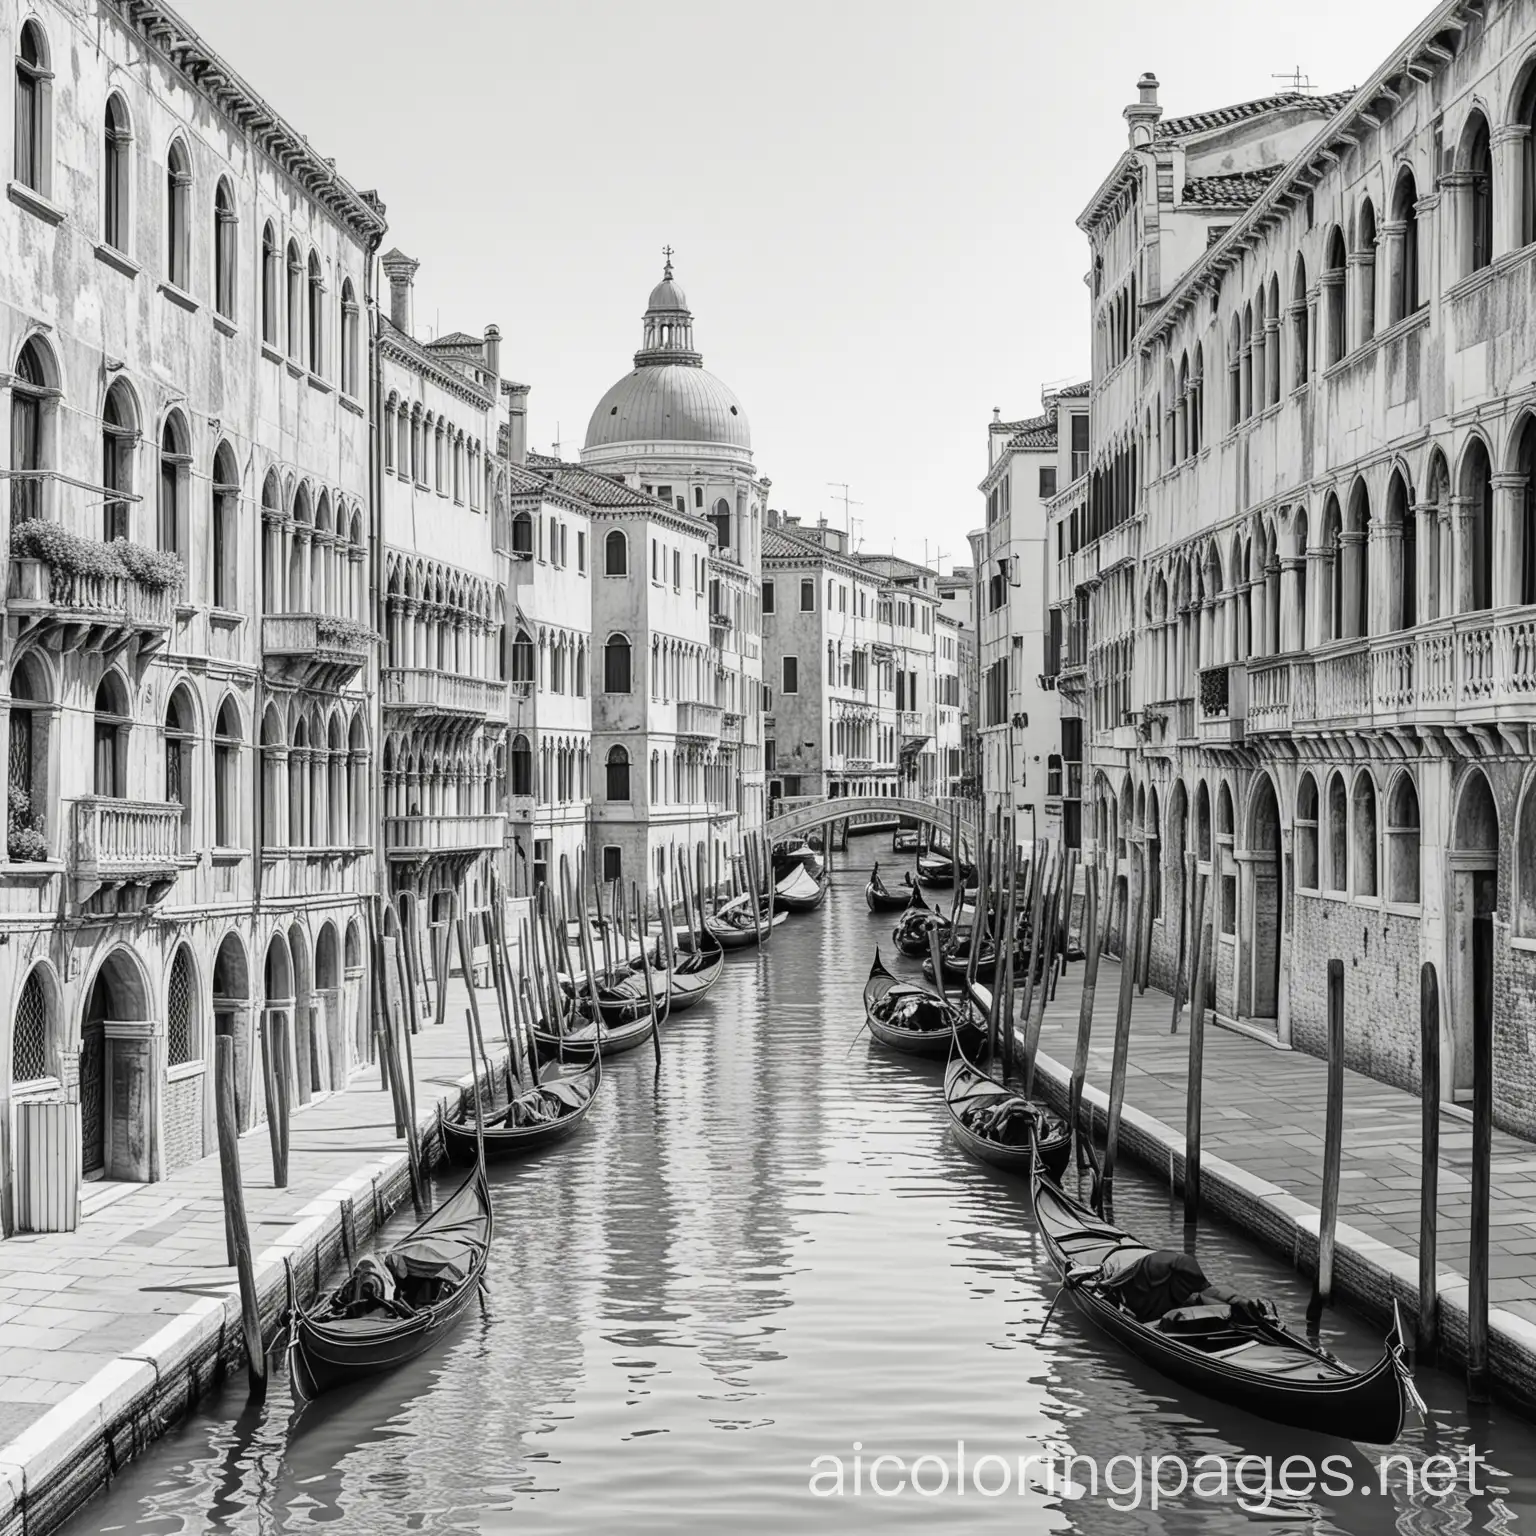 Venice-Coloring-Page-Simplistic-Black-and-White-Line-Art-on-White-Background